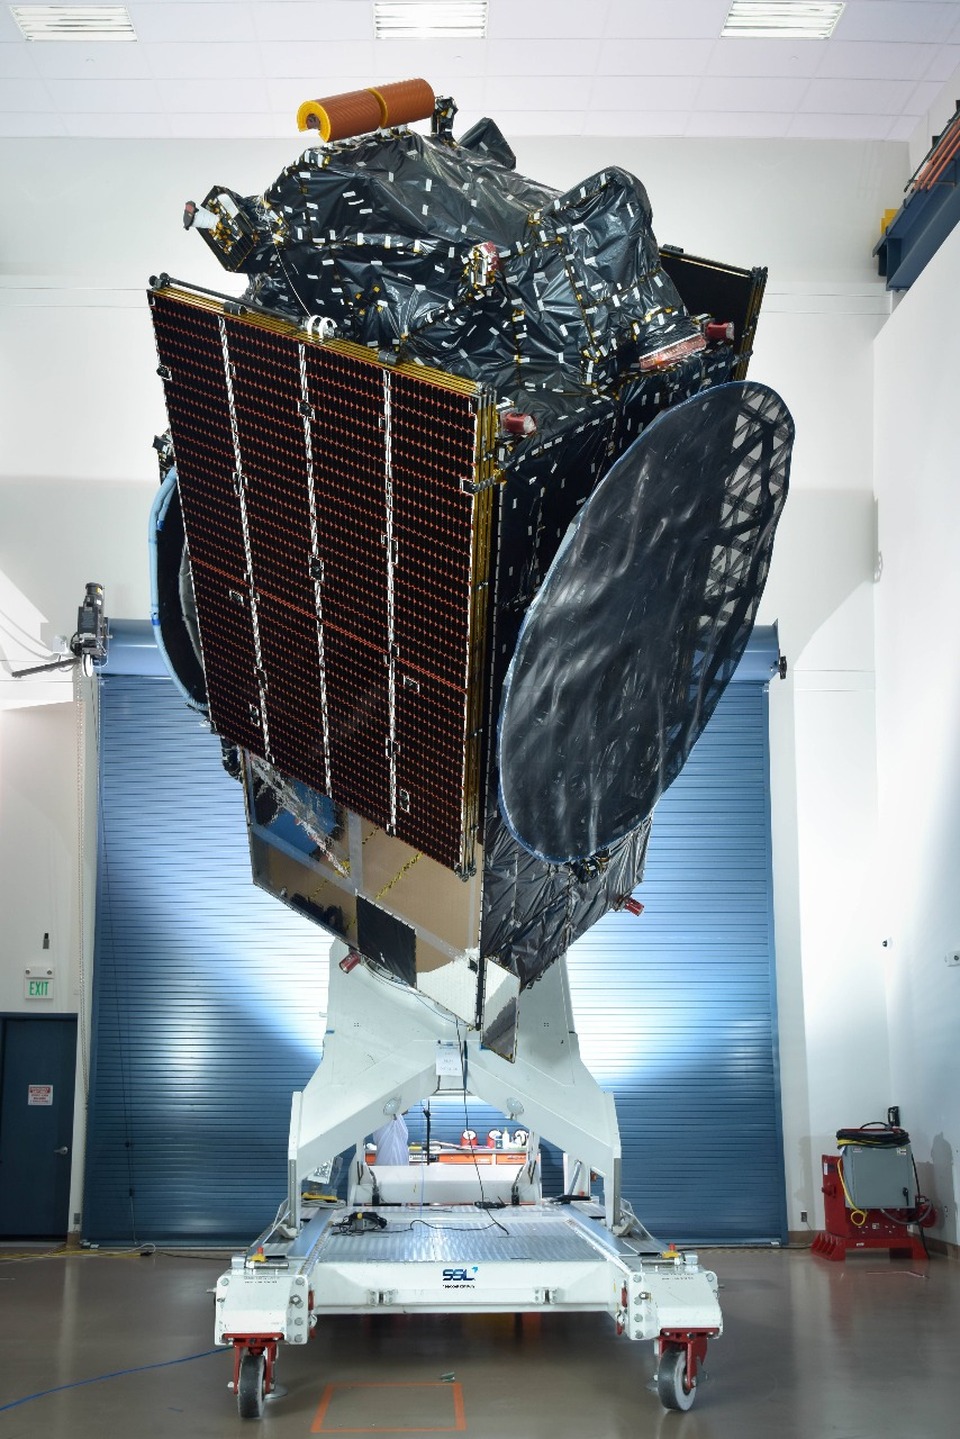 Telkom's Merah Putih satellite. The company will save up to a quarter of the cost involved in the launch of its latest satellite with SpaceX's reusable rocket technology. (Photo courtesy of SSL)